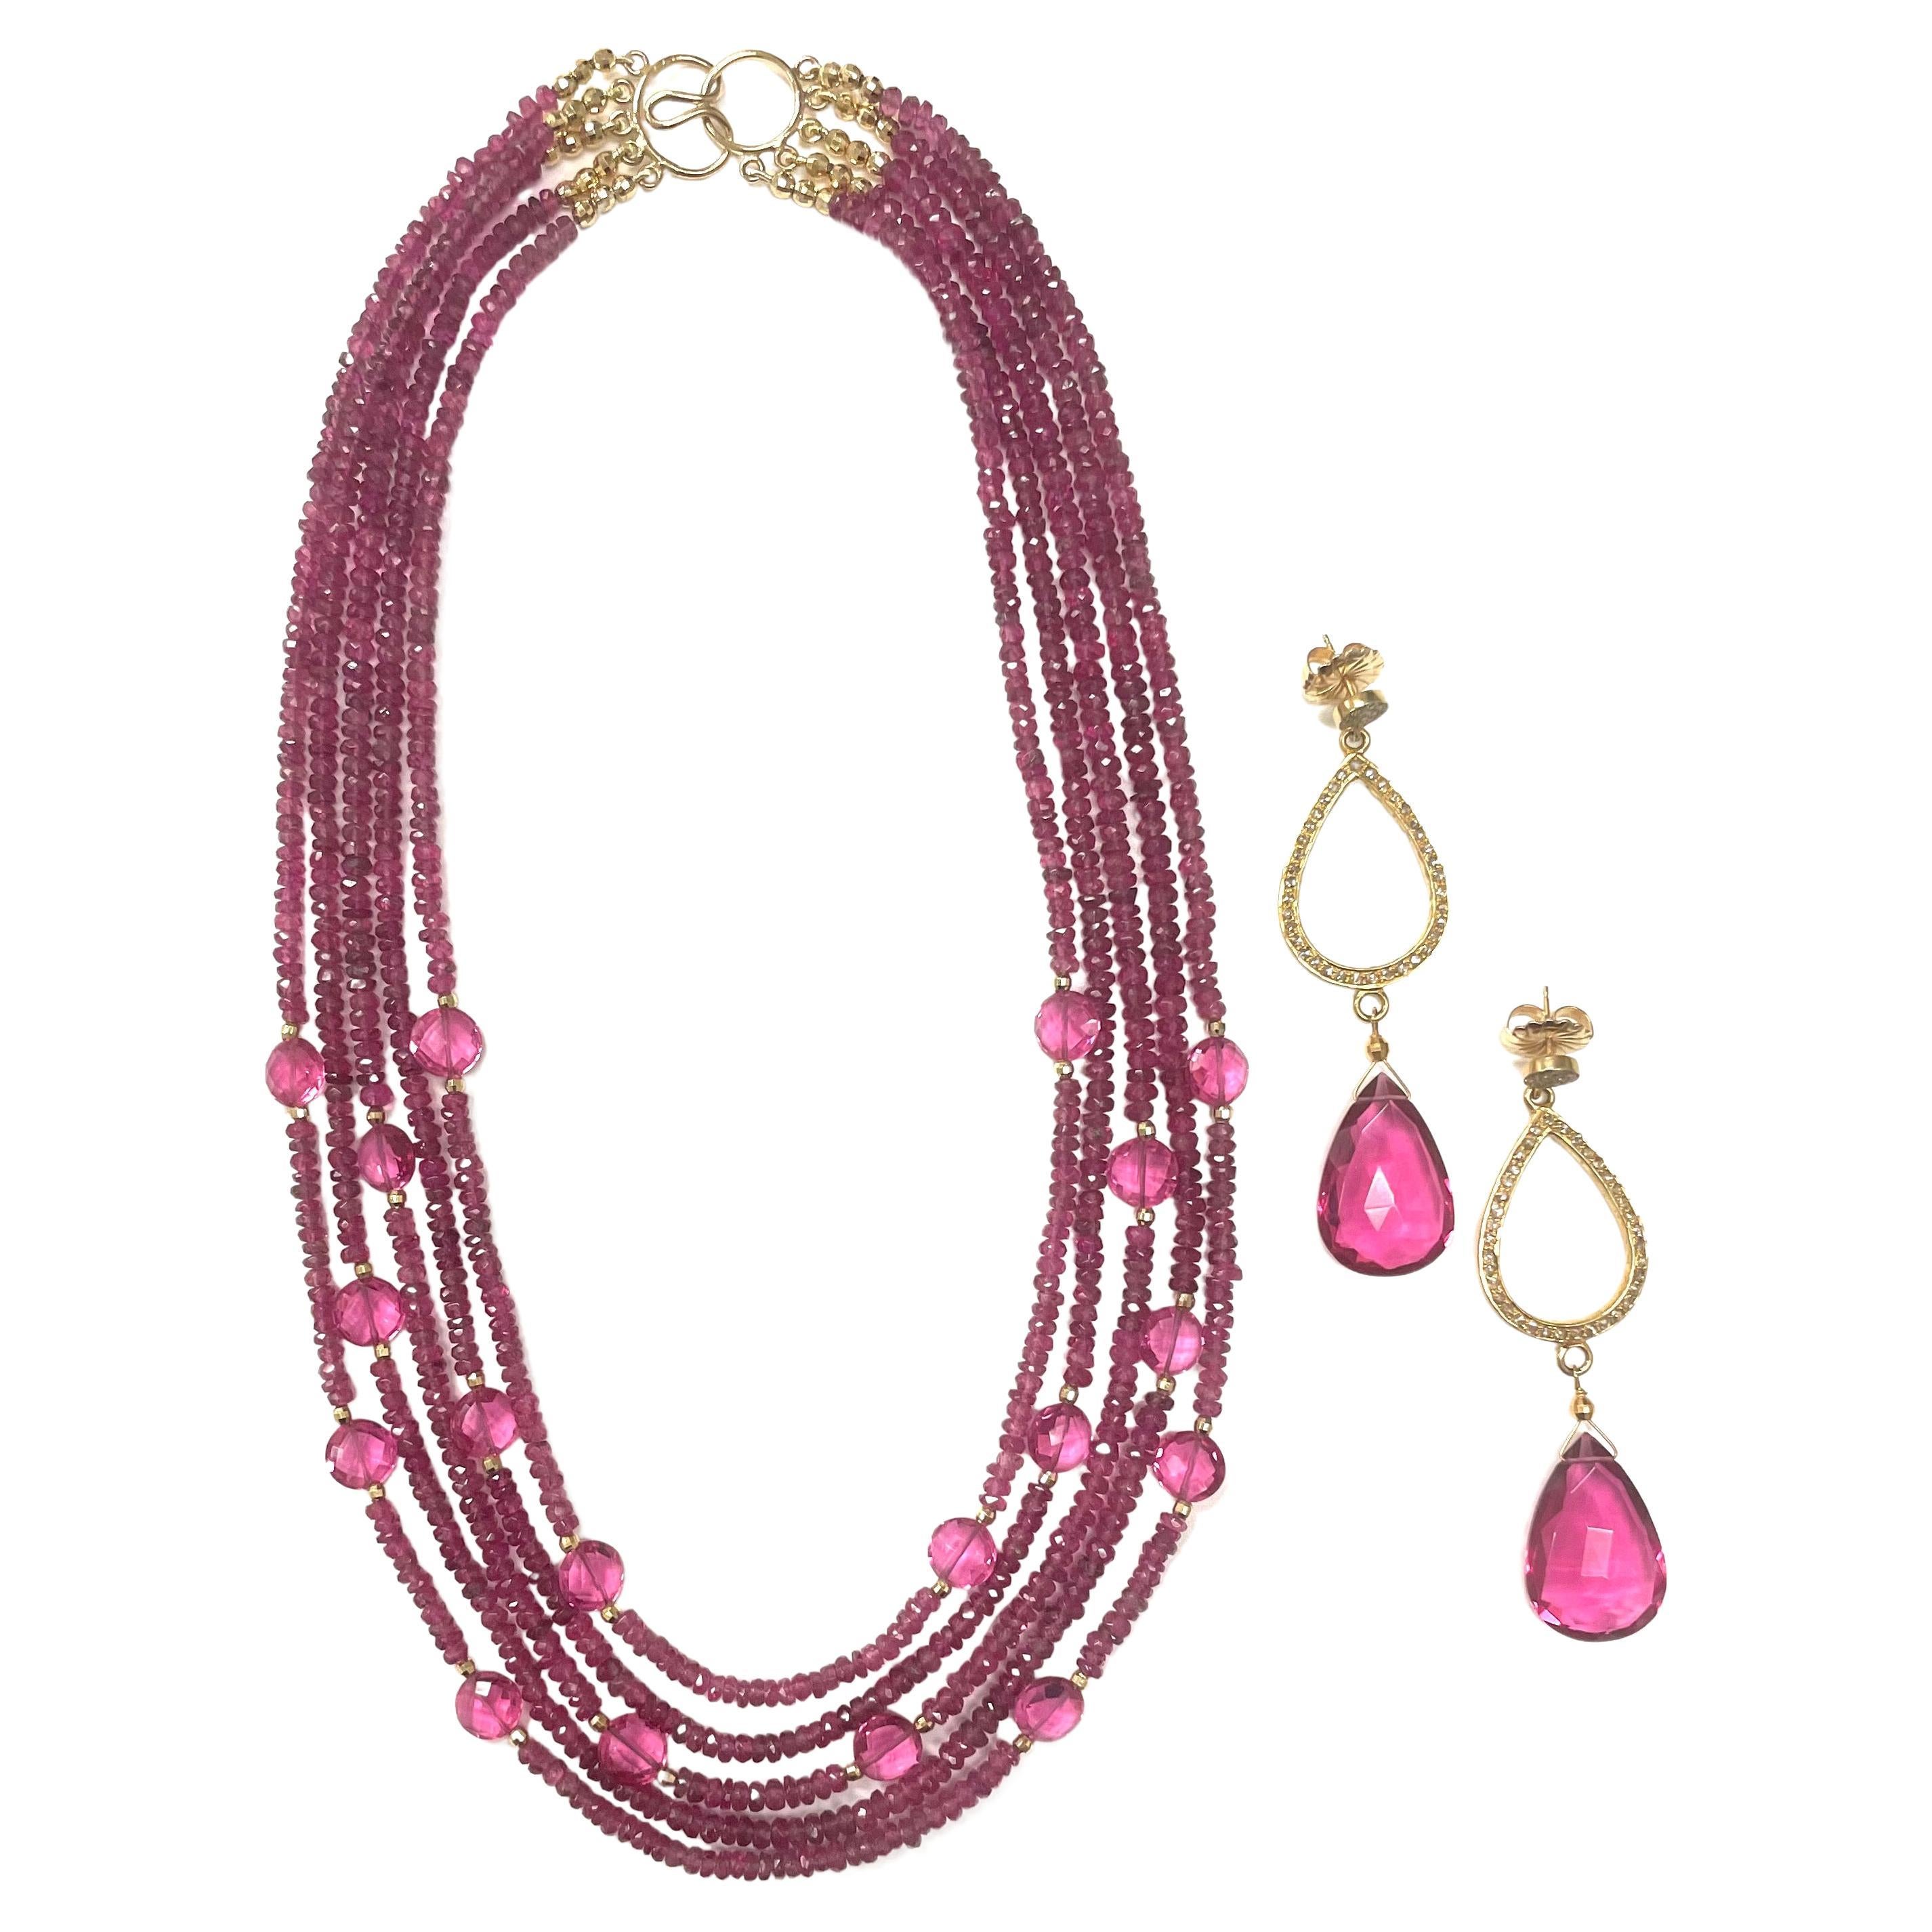 Bead Multi-Strand Pink Tourmaline Paradizia Necklace with Hot Pink Quartz Accents For Sale